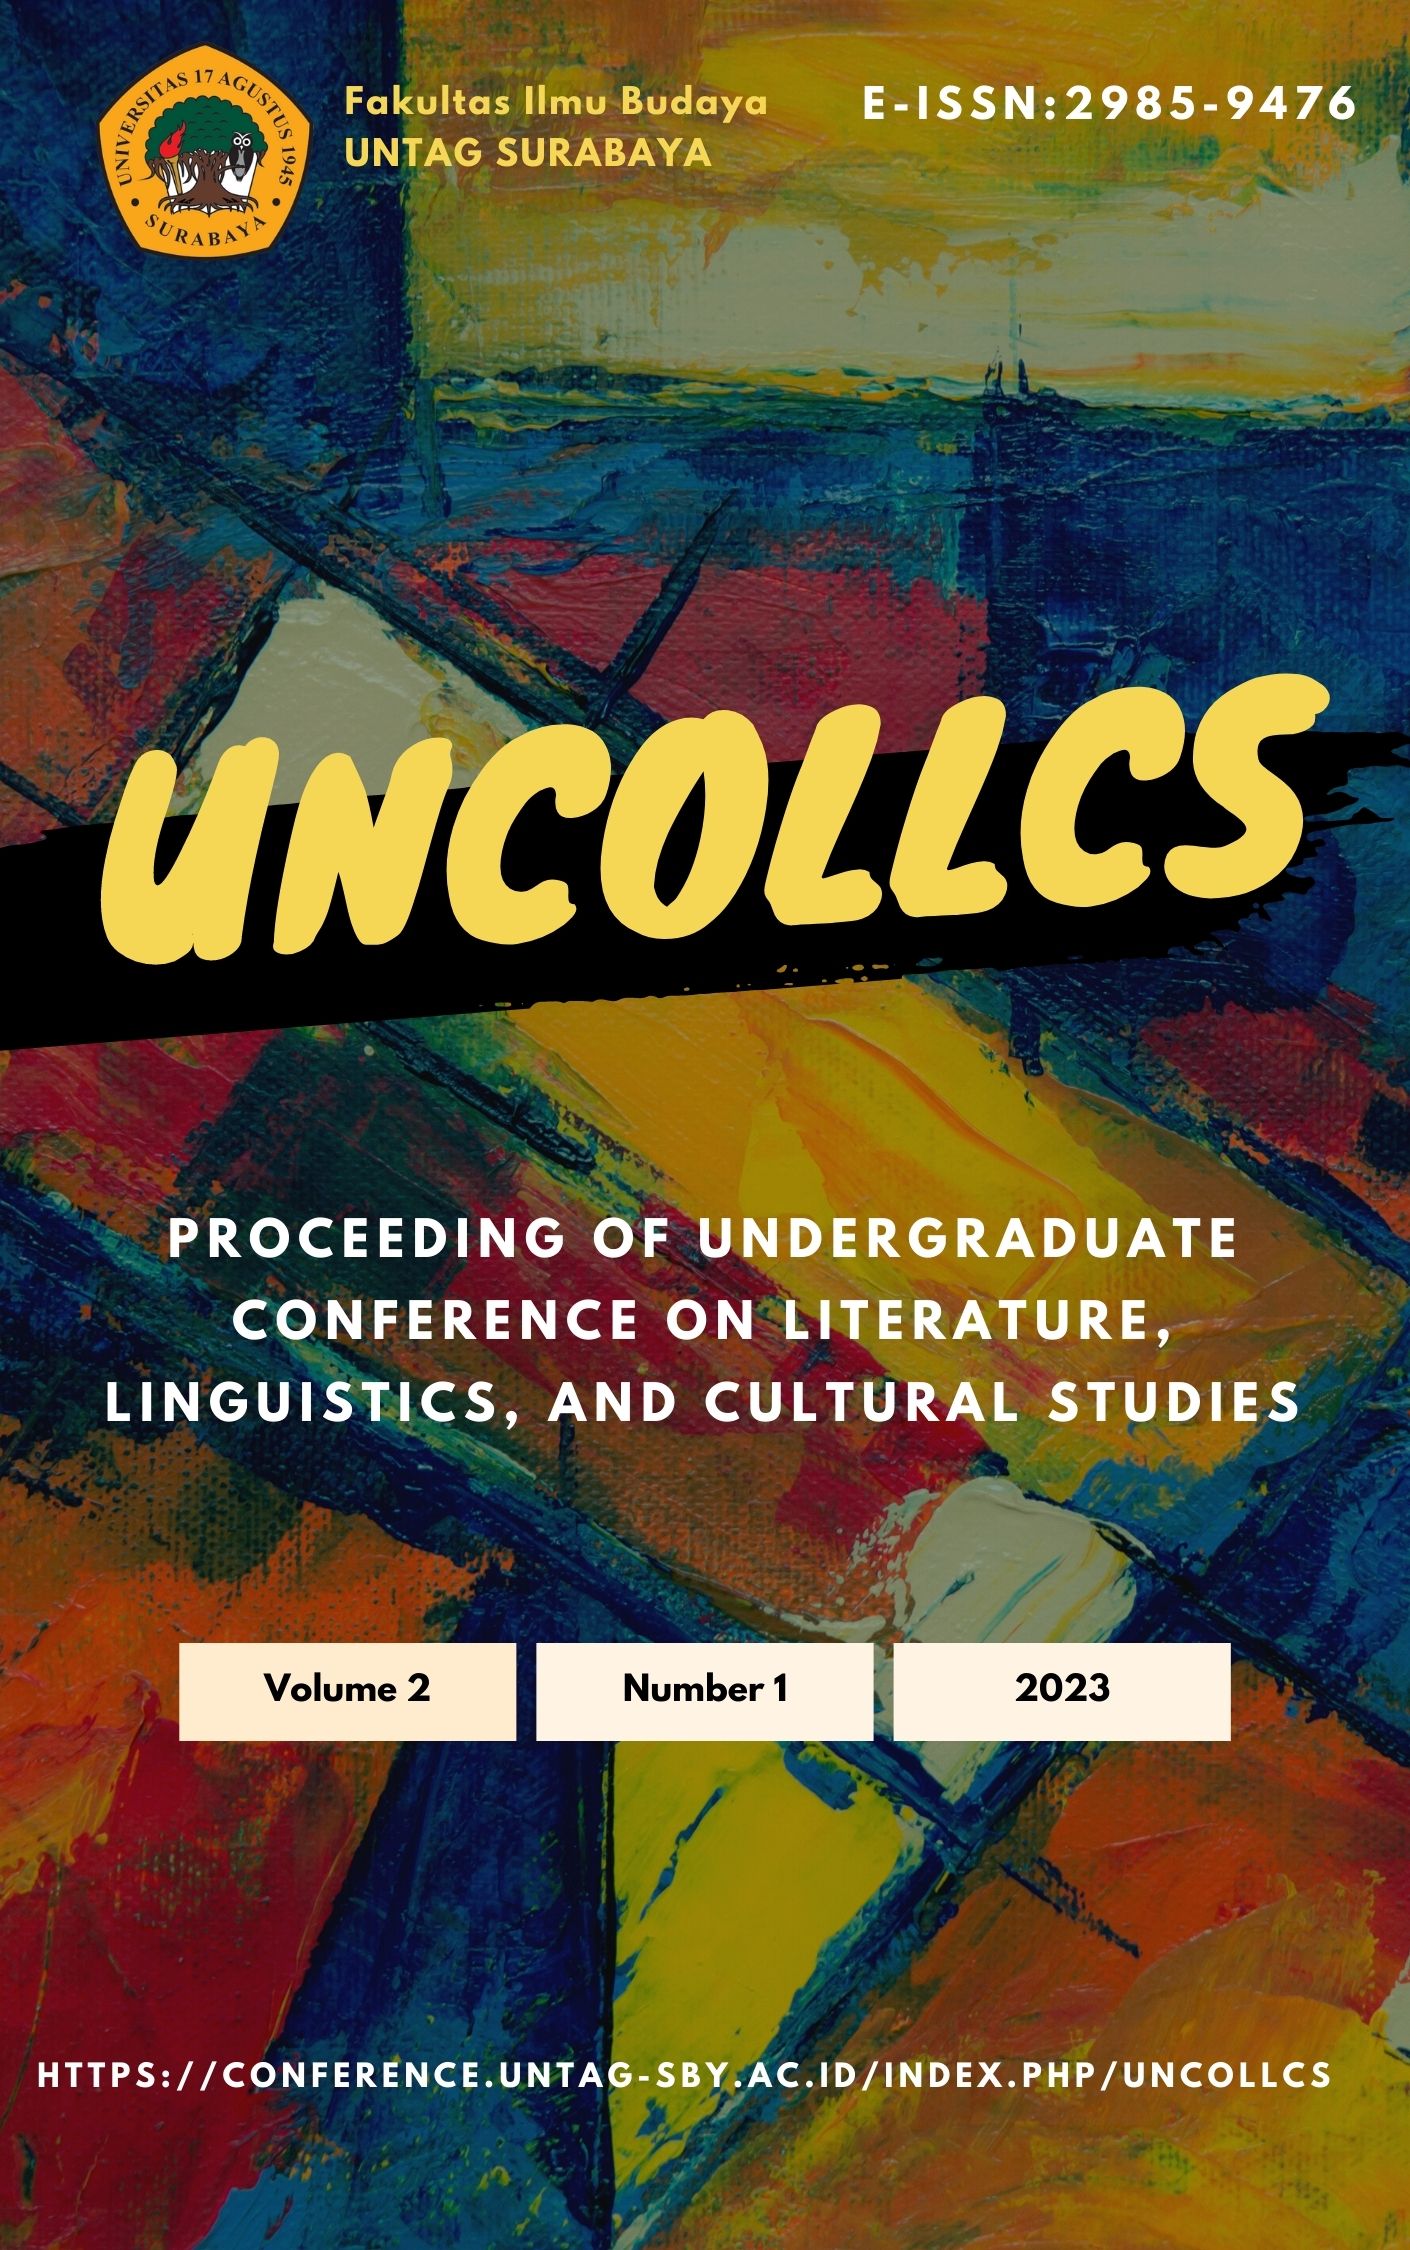 					View Vol. 2 No. 1 (2023): PROCEEDING RESEARCH ON LITERARY, LINGUISTIC, AND CULTURAL STUDIES
				